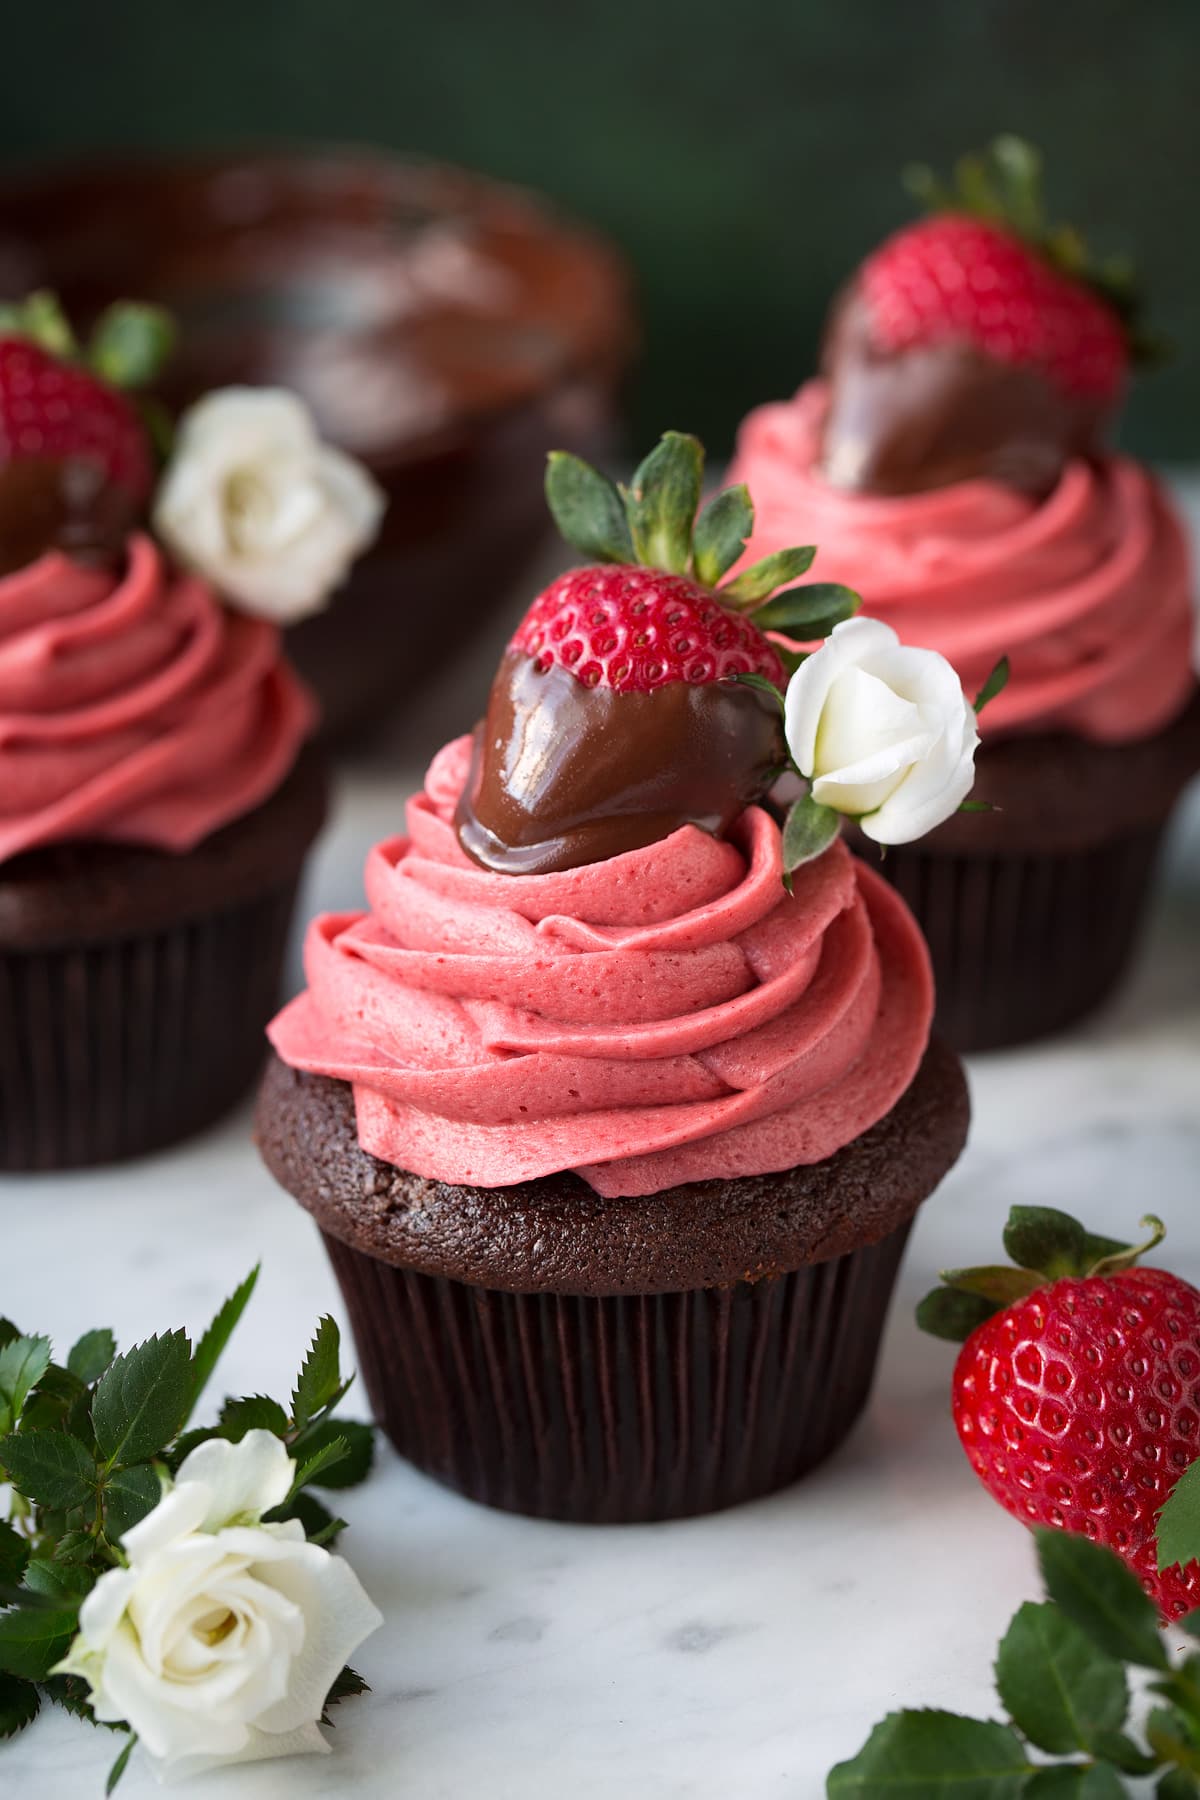 Chocolate Cupcakes with Strawberry Buttercream Frosting and Chocolate Covered Strawberries